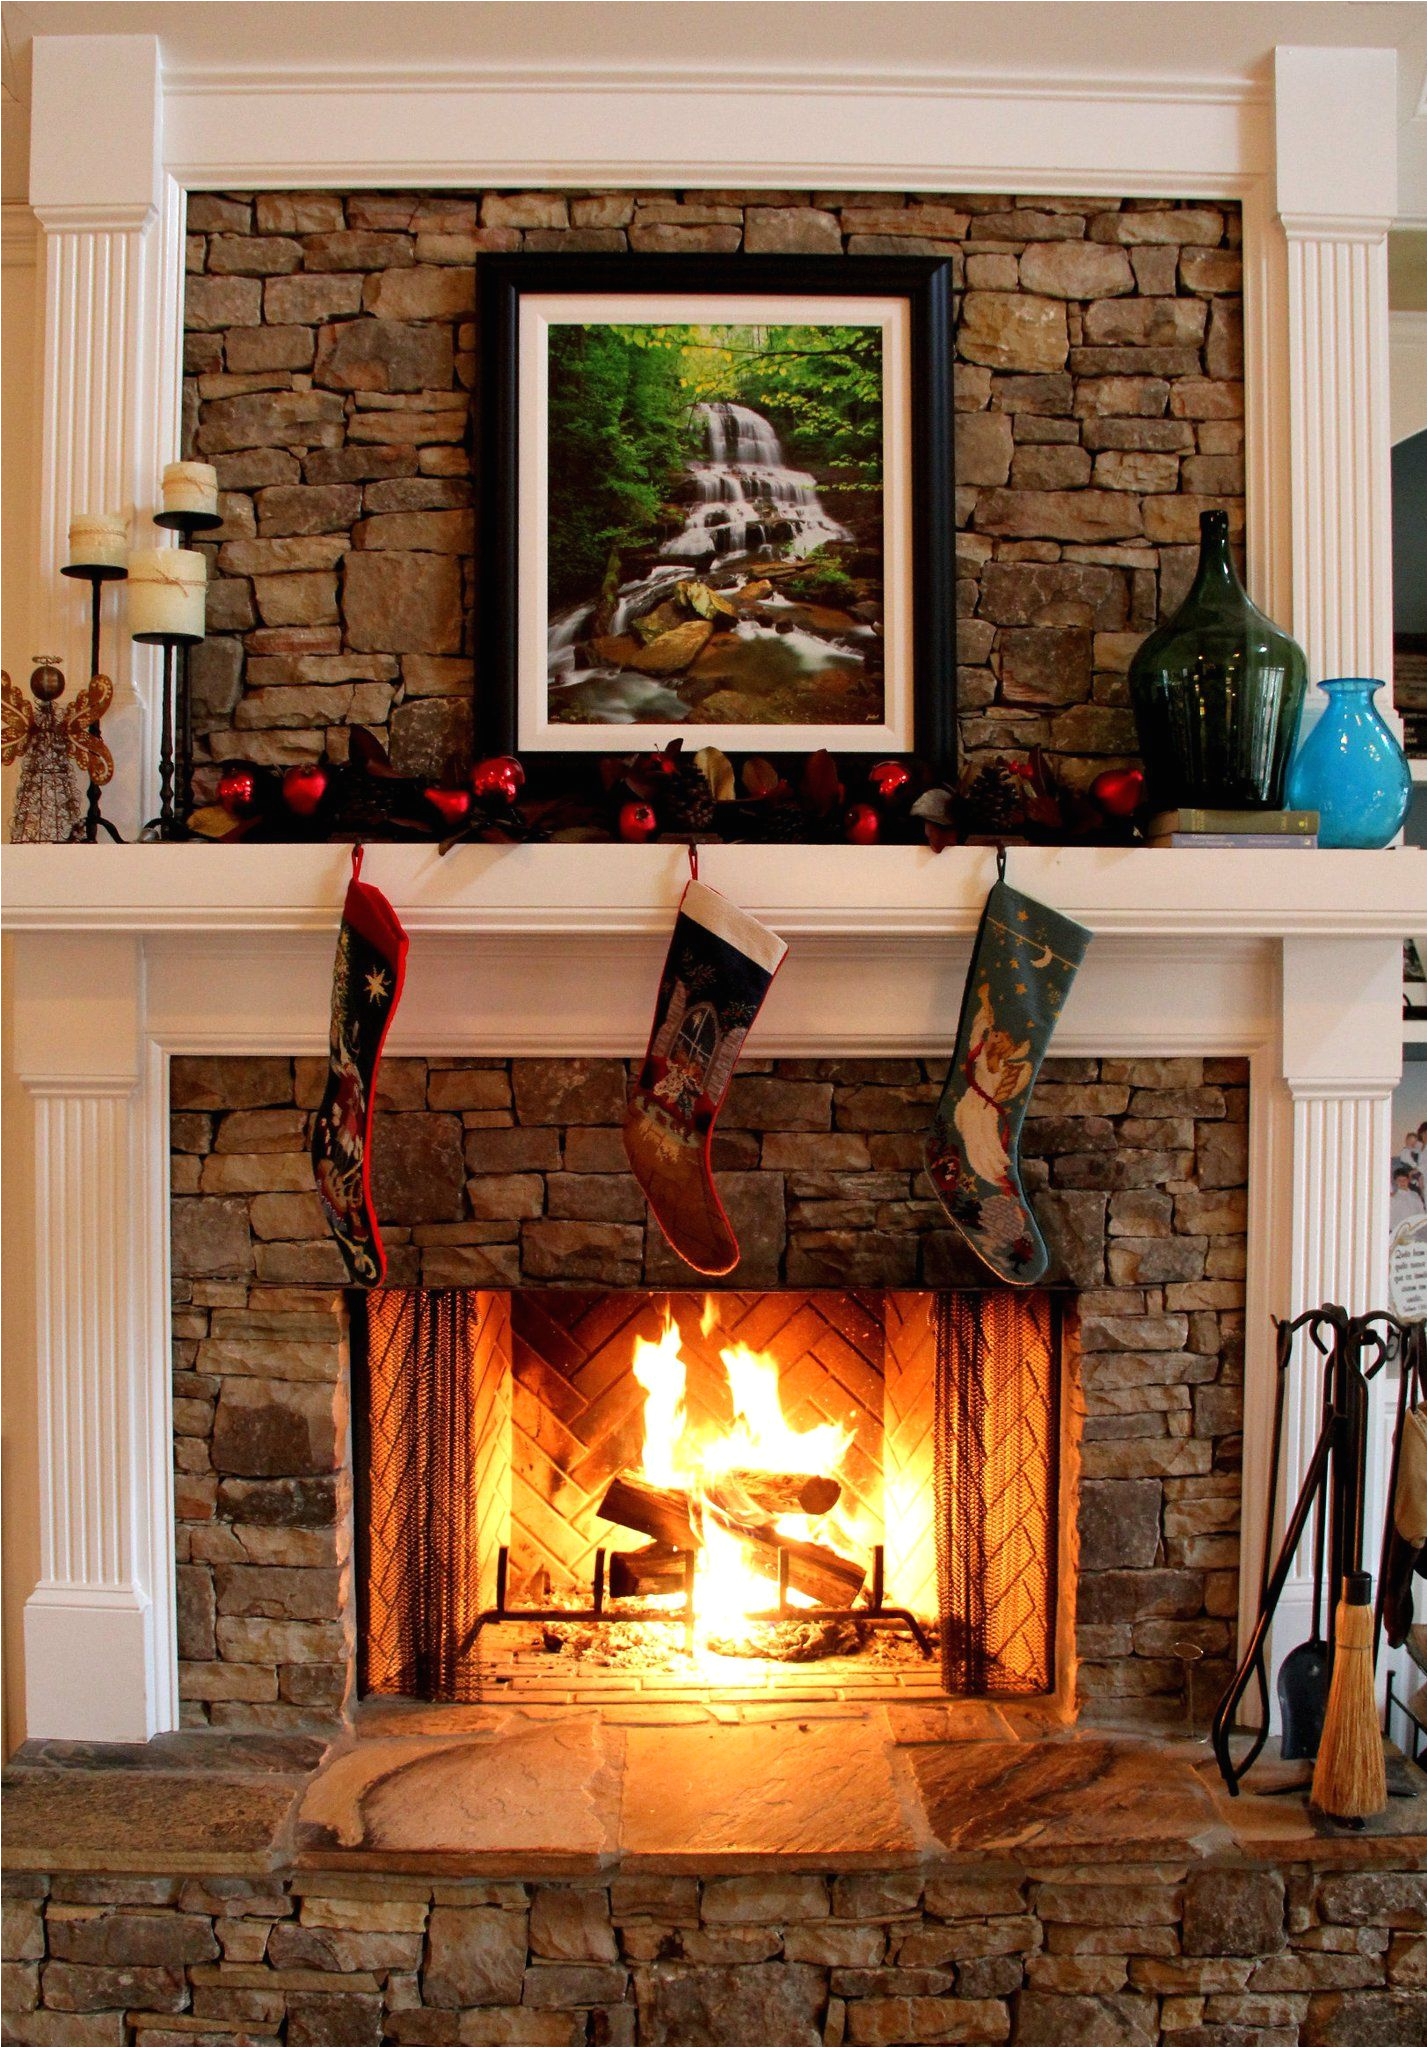 Mobile Home Fireplace Best Of How to Build A Gas Fireplace Hearth Love the Wood Mixed with